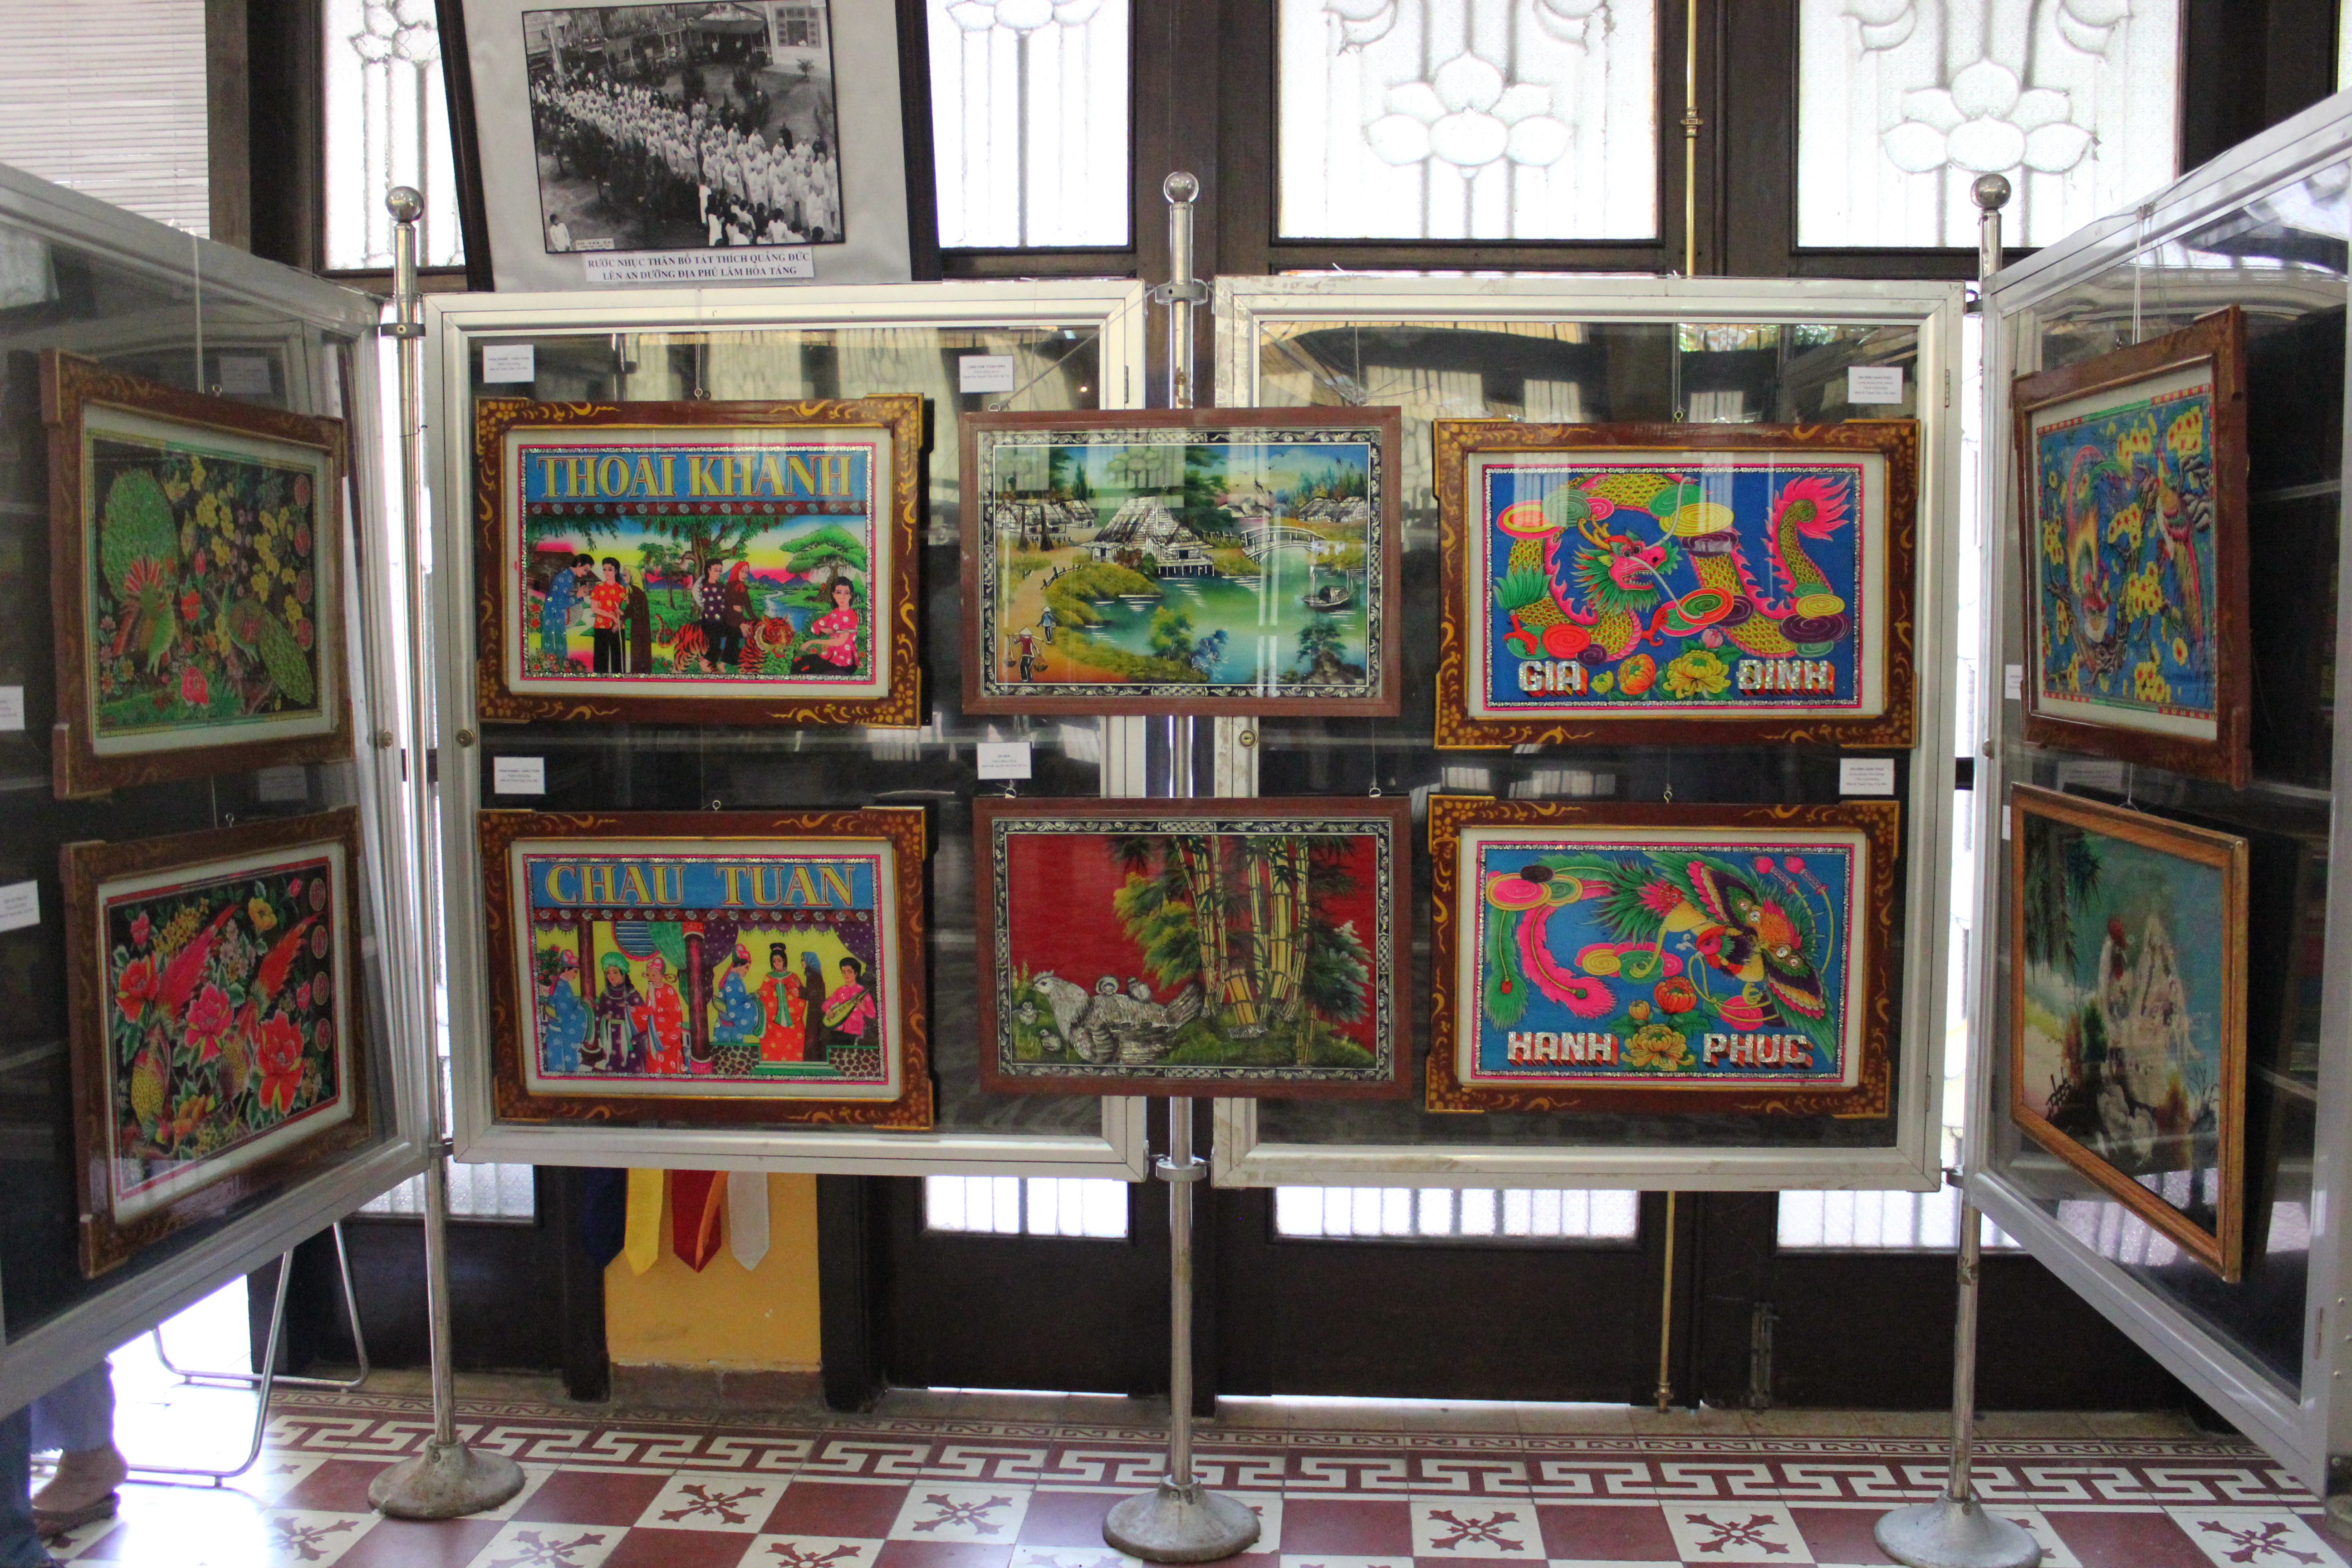 HCMC exhibition on glass paintings closes today